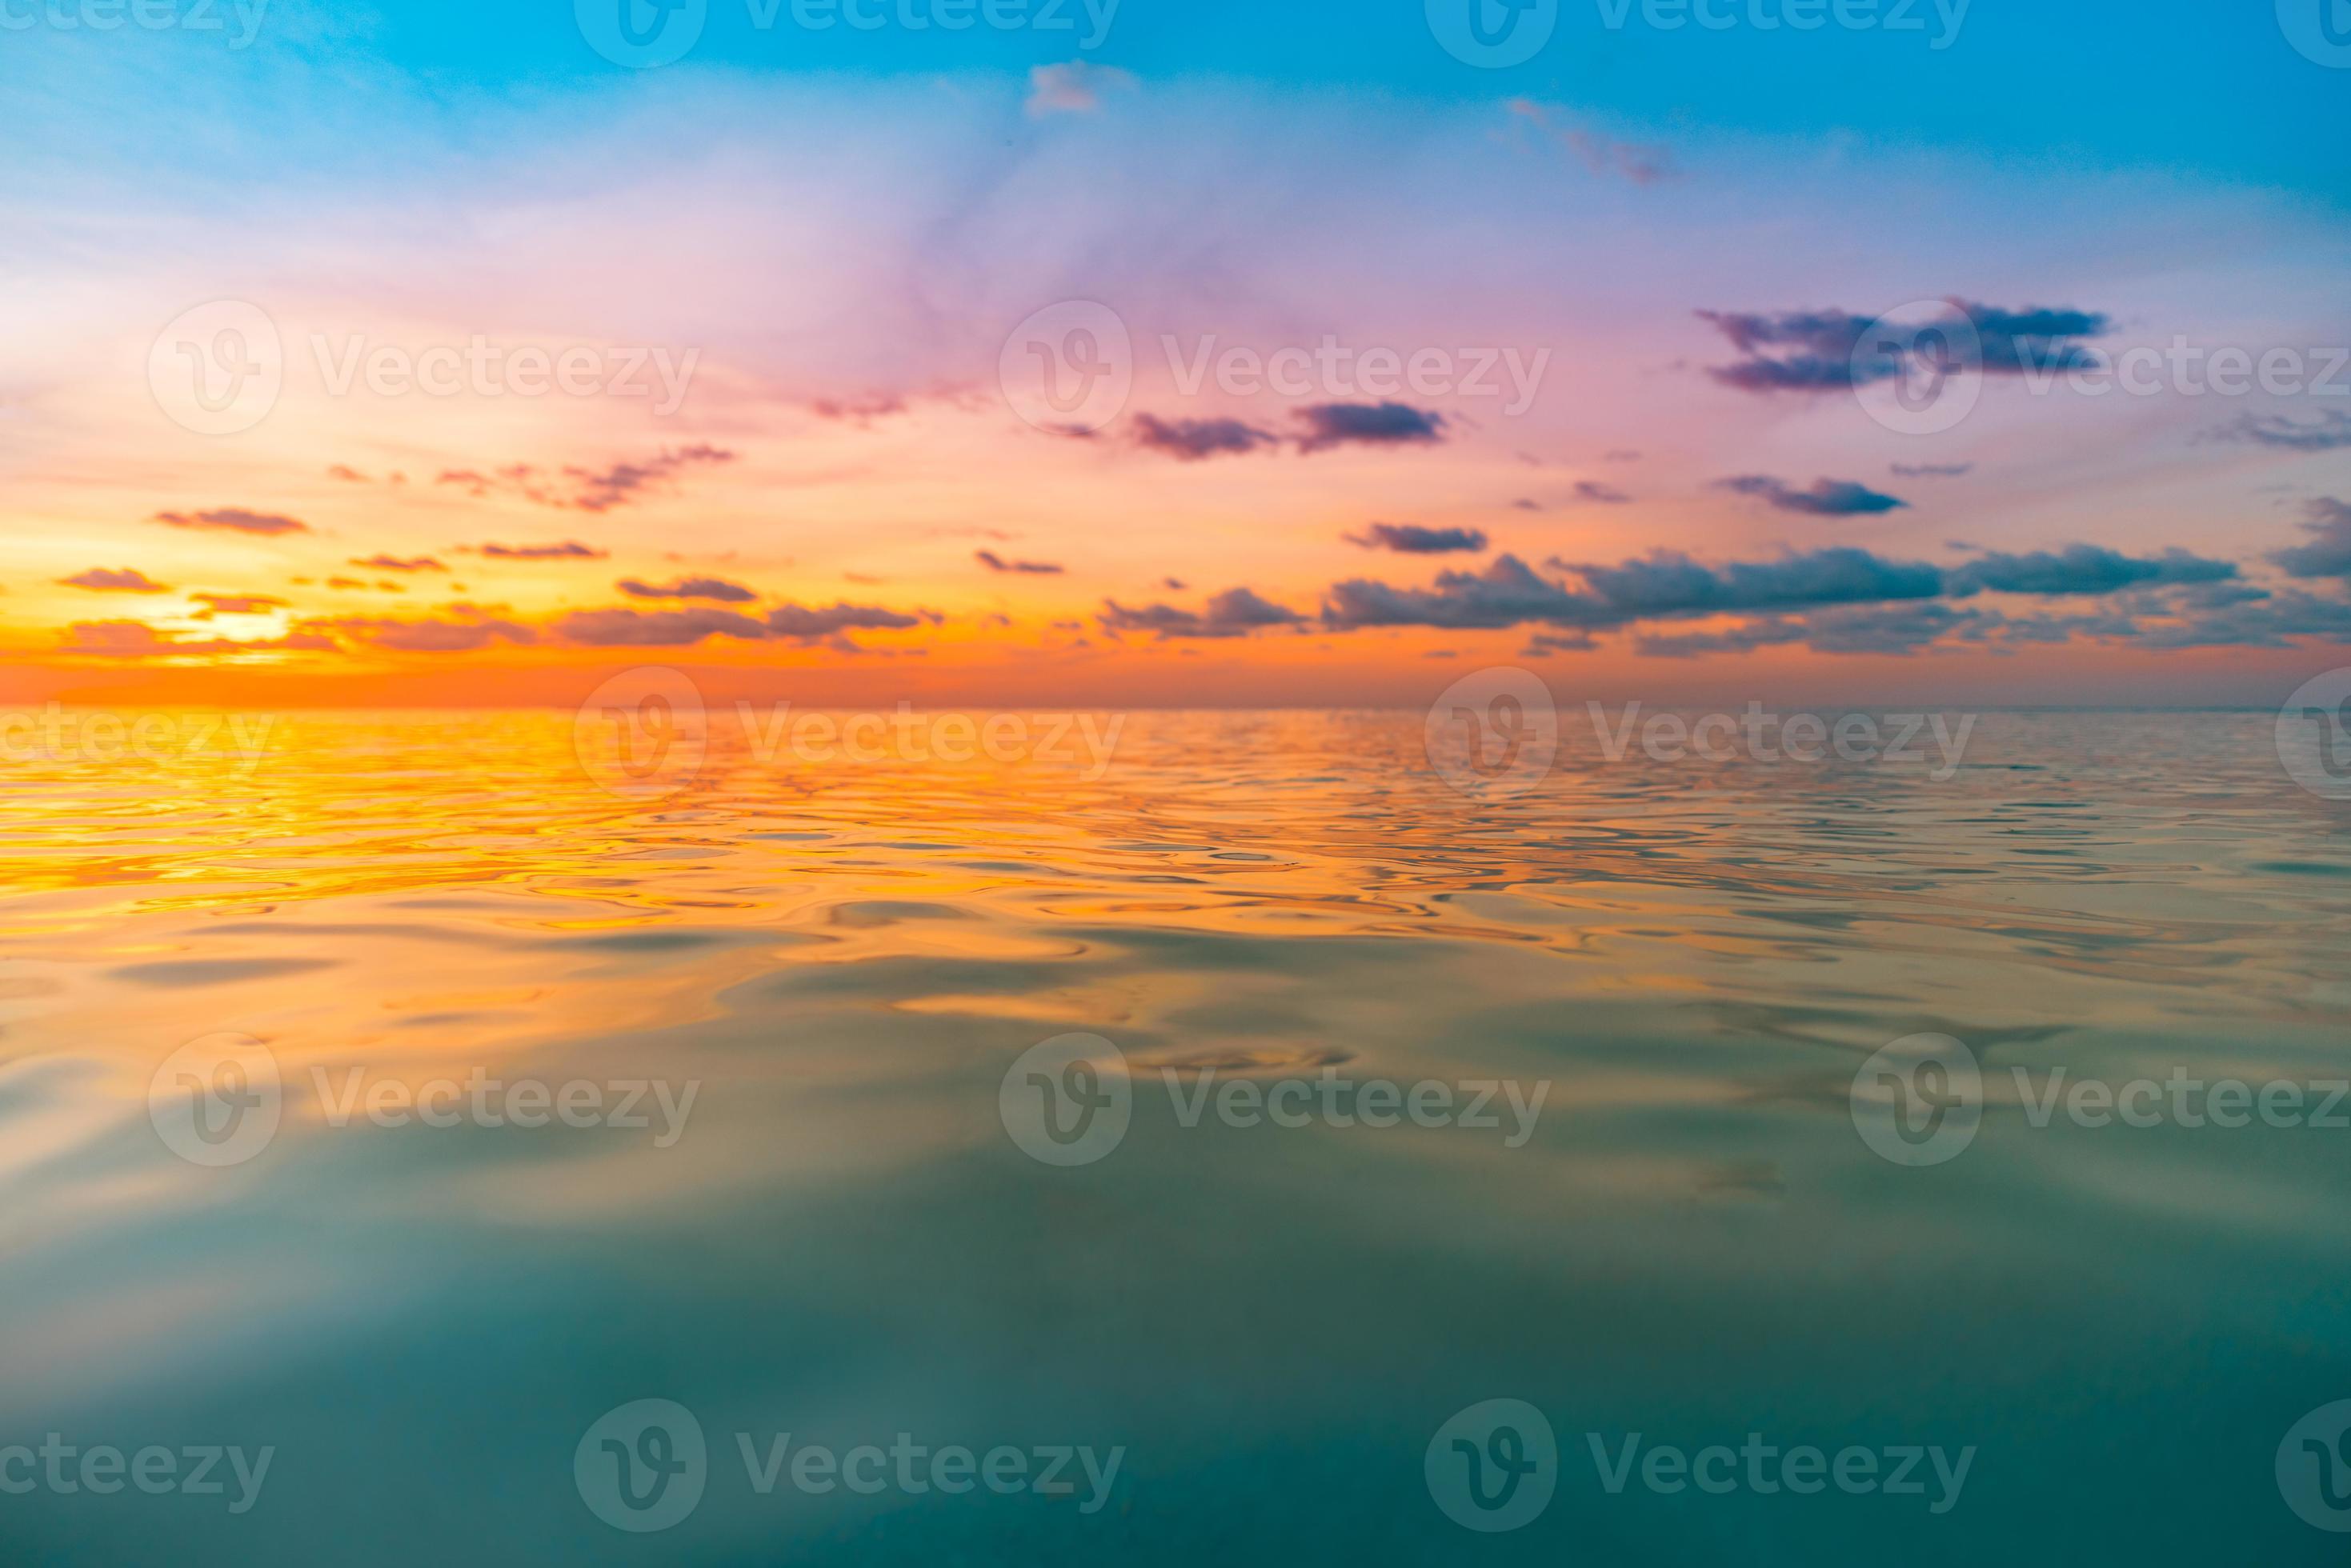 Sunset sea seascape. Colorful ocean beach sunrise. Beautiful beach scenery  with calm waves and soft sandy beach. Empty tropical landscape, horizon  with scenic coast view. Colorful nature sea sky 8713146 Stock Photo